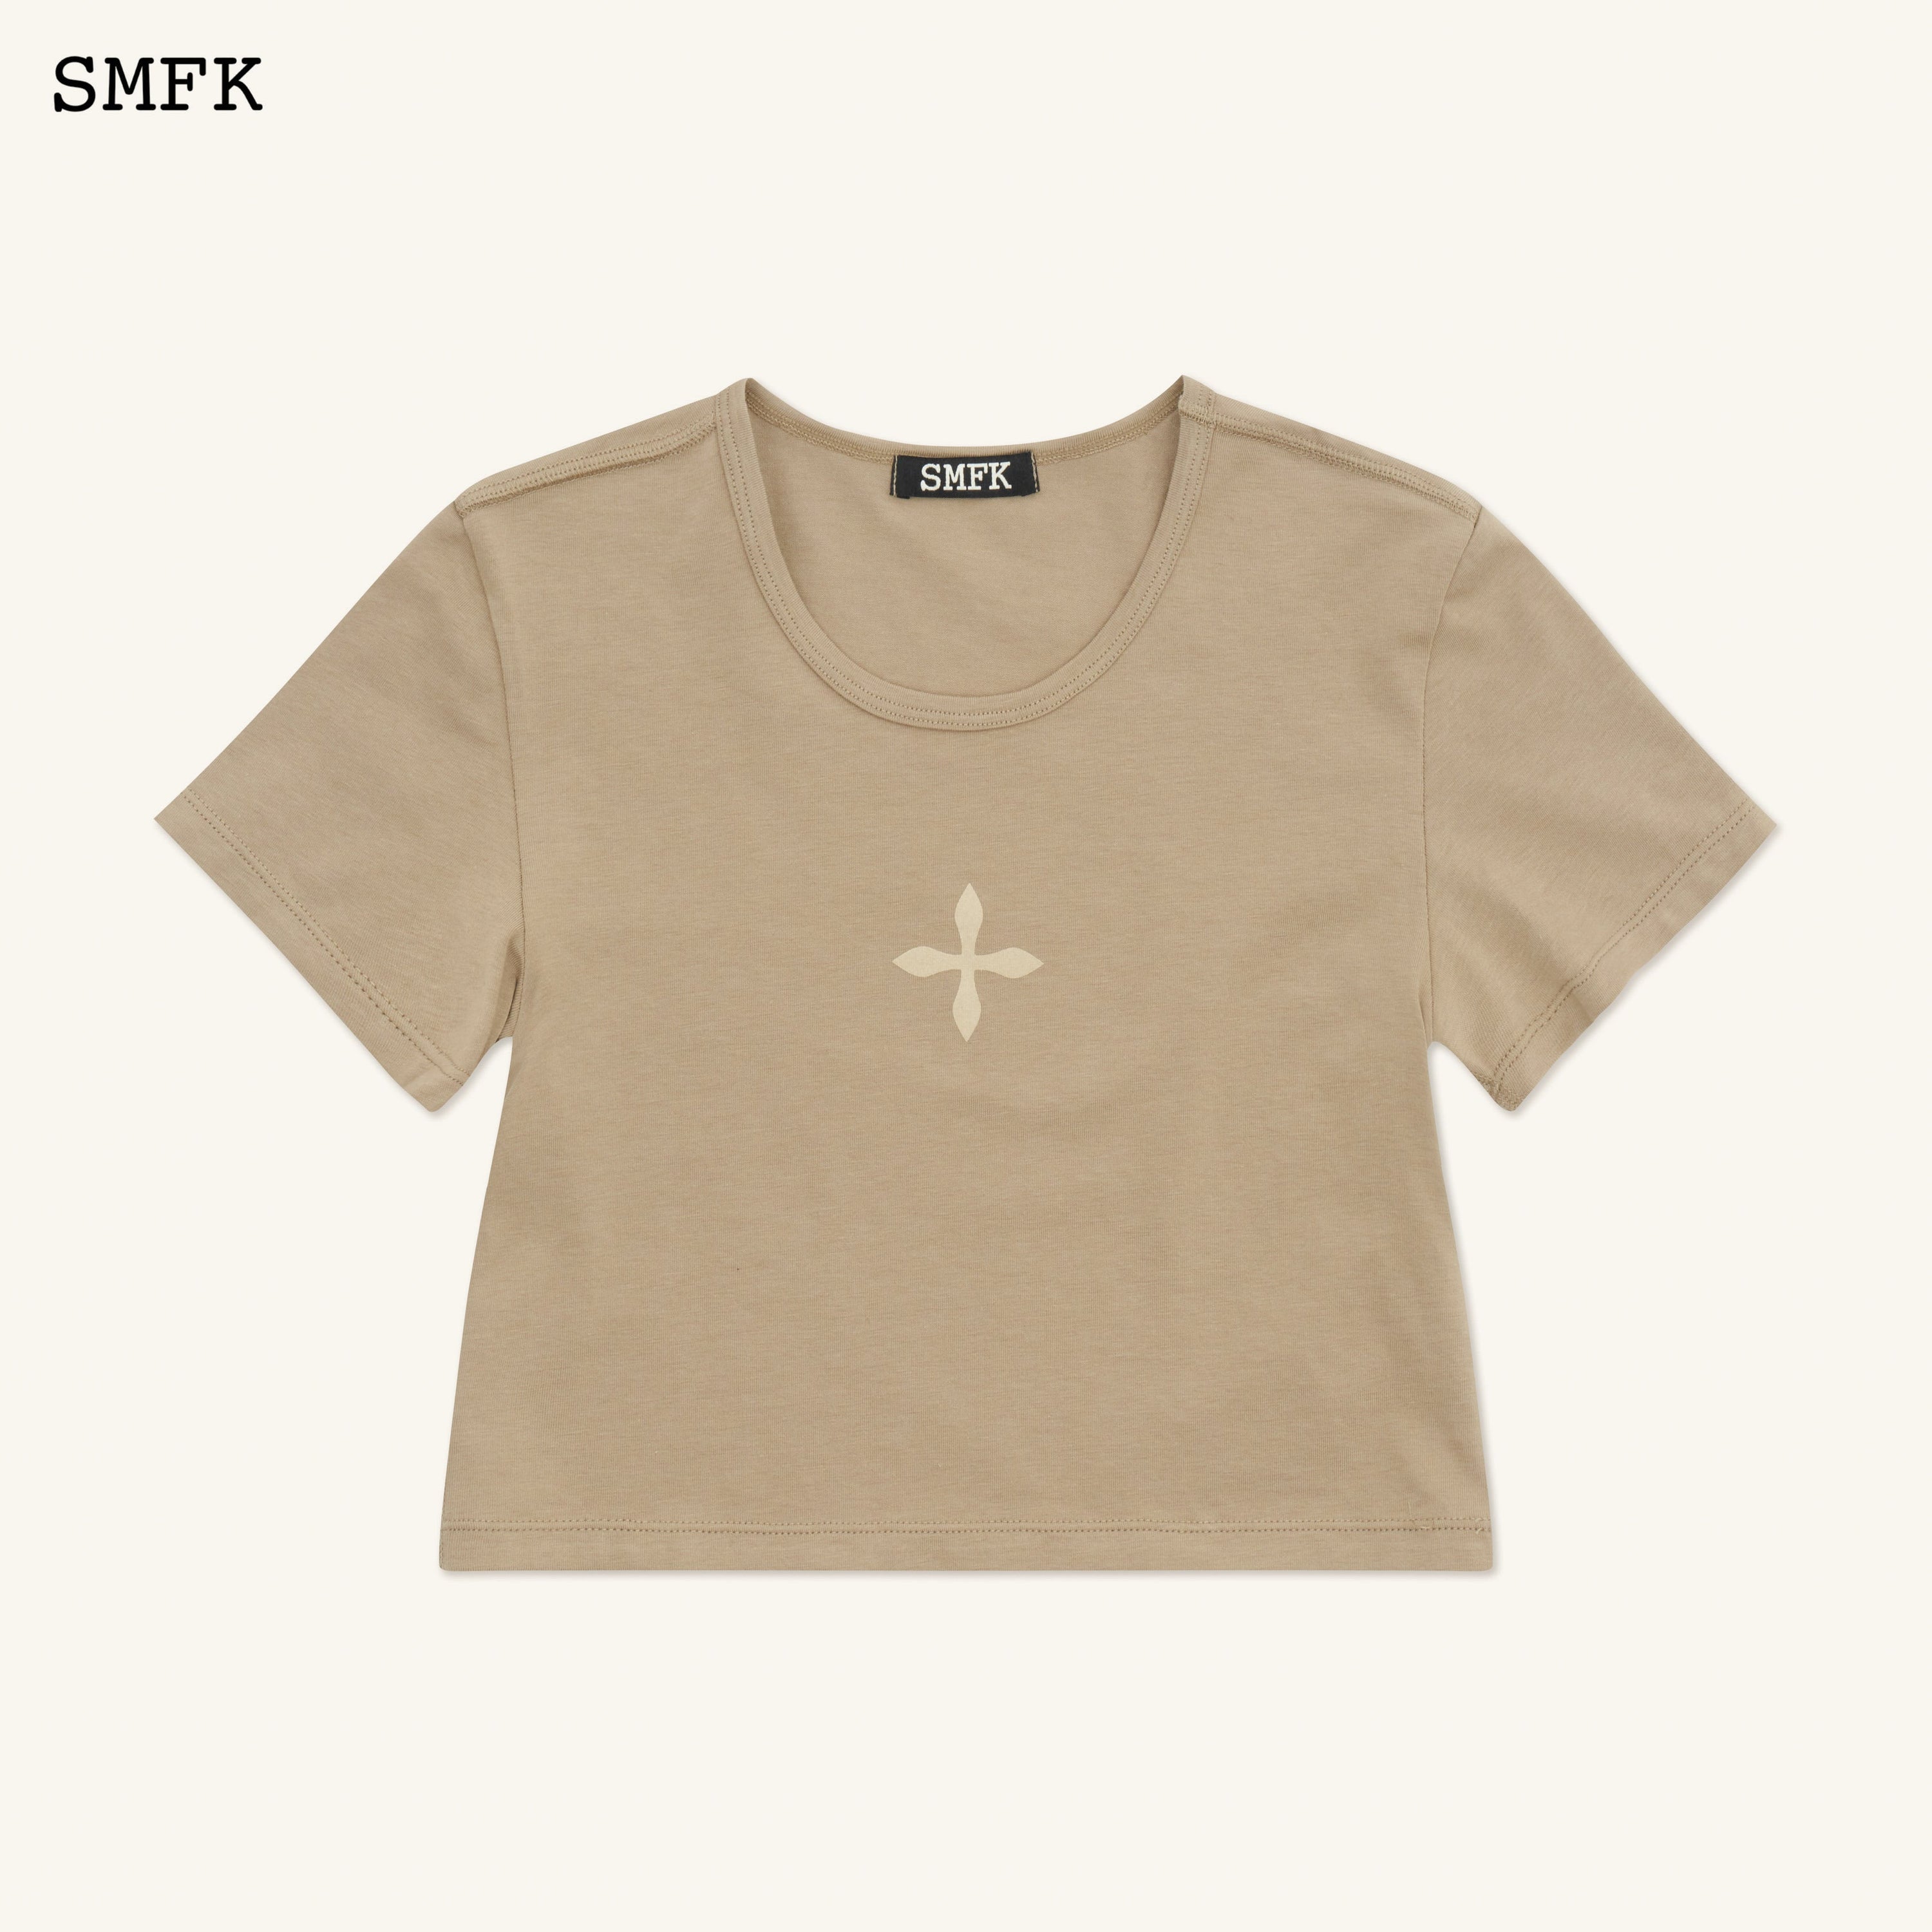 Compass Cross Classic Sporty Tights Tee In Khaki - SMFK Official